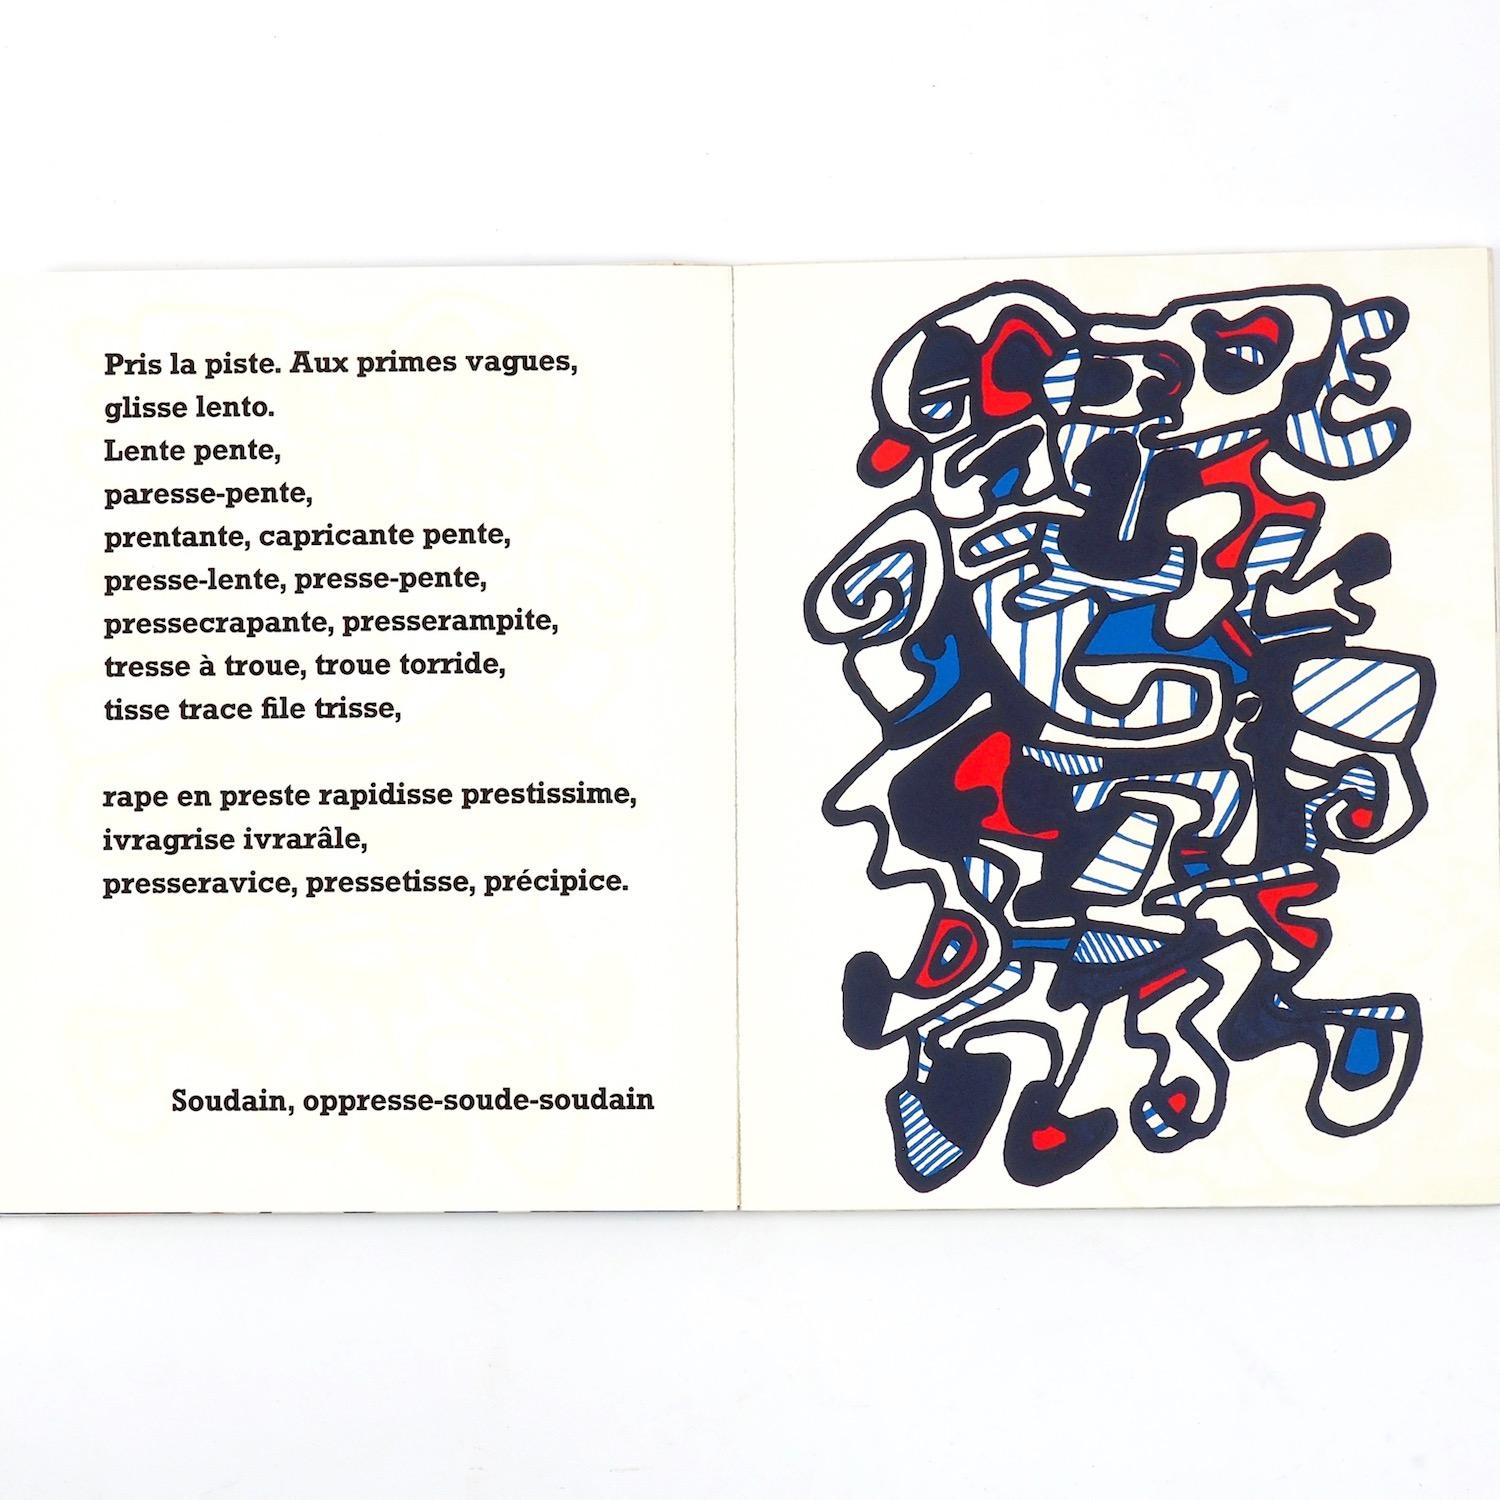 Jean Dubuffet. Cerceaux ‘Sorcellent by Max Loreau. Edition Jeanne Bucher, Editions Beyeler, Paris, 1967. Limited edition of 800 of which this is no. 496.

Contains 20 original colour silk screen prints by Dubuffet. A Beautiful example of the Livre